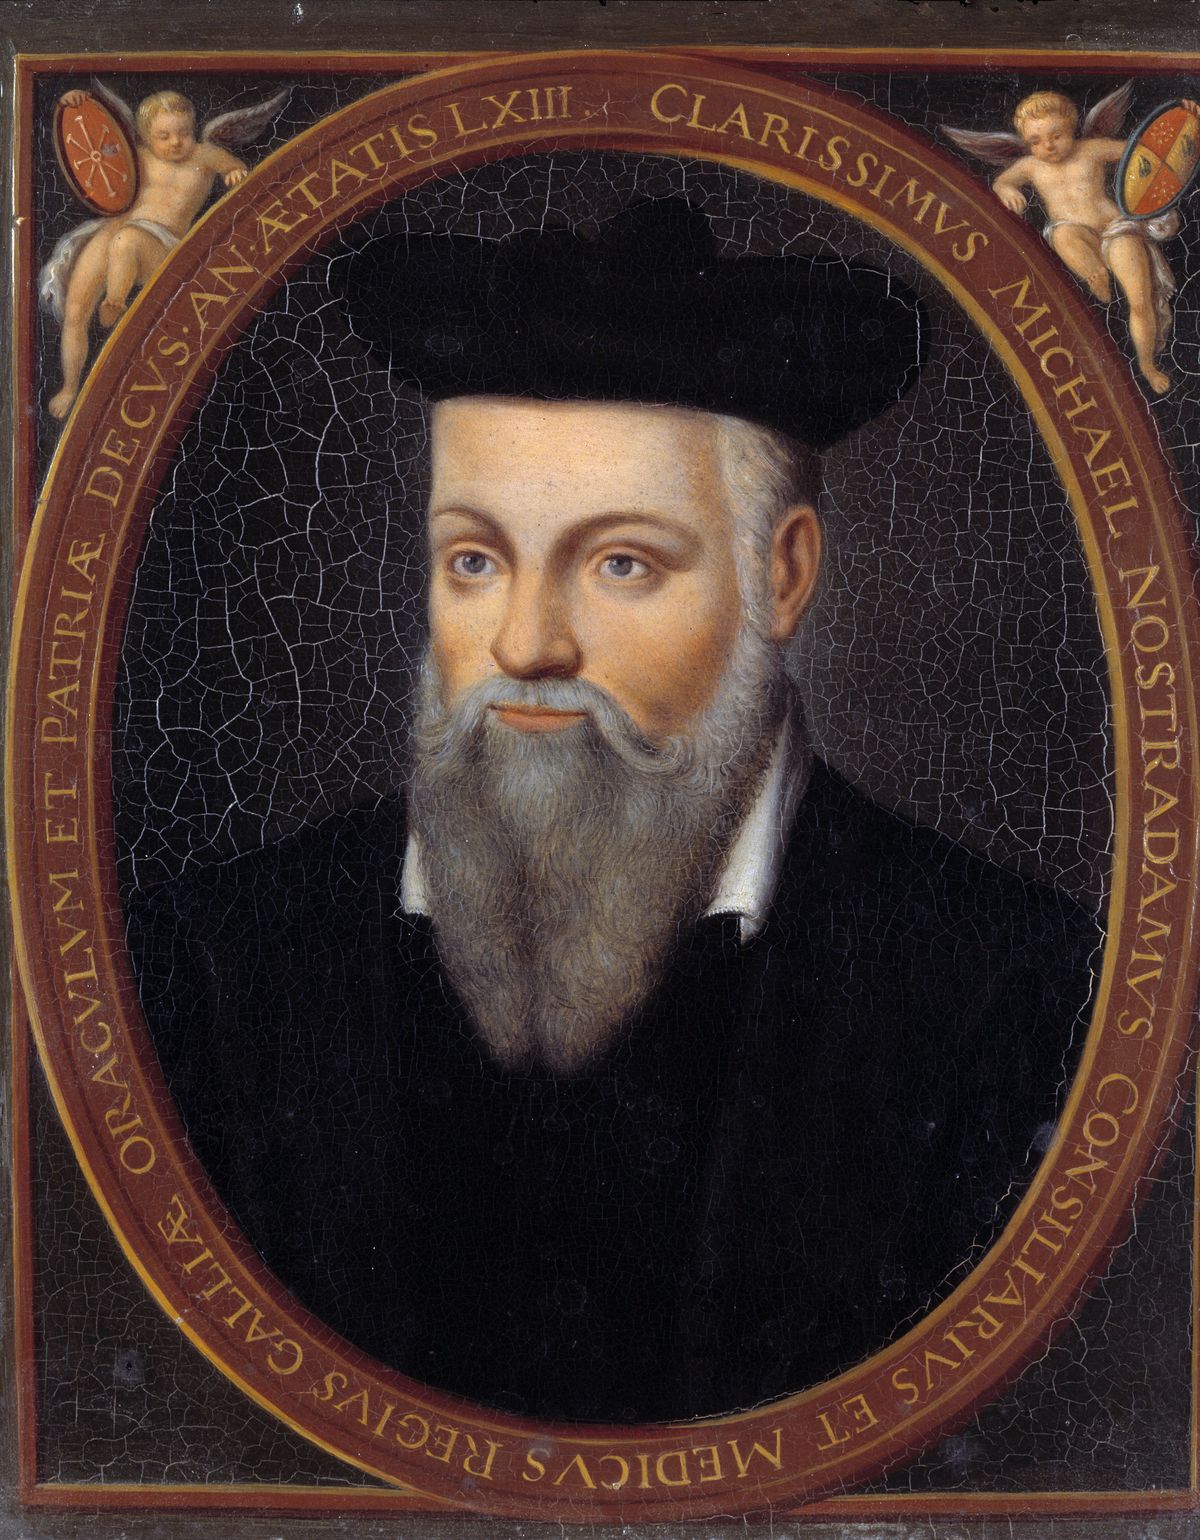 How Nostradamus’ Prophecies Have Affected Our World